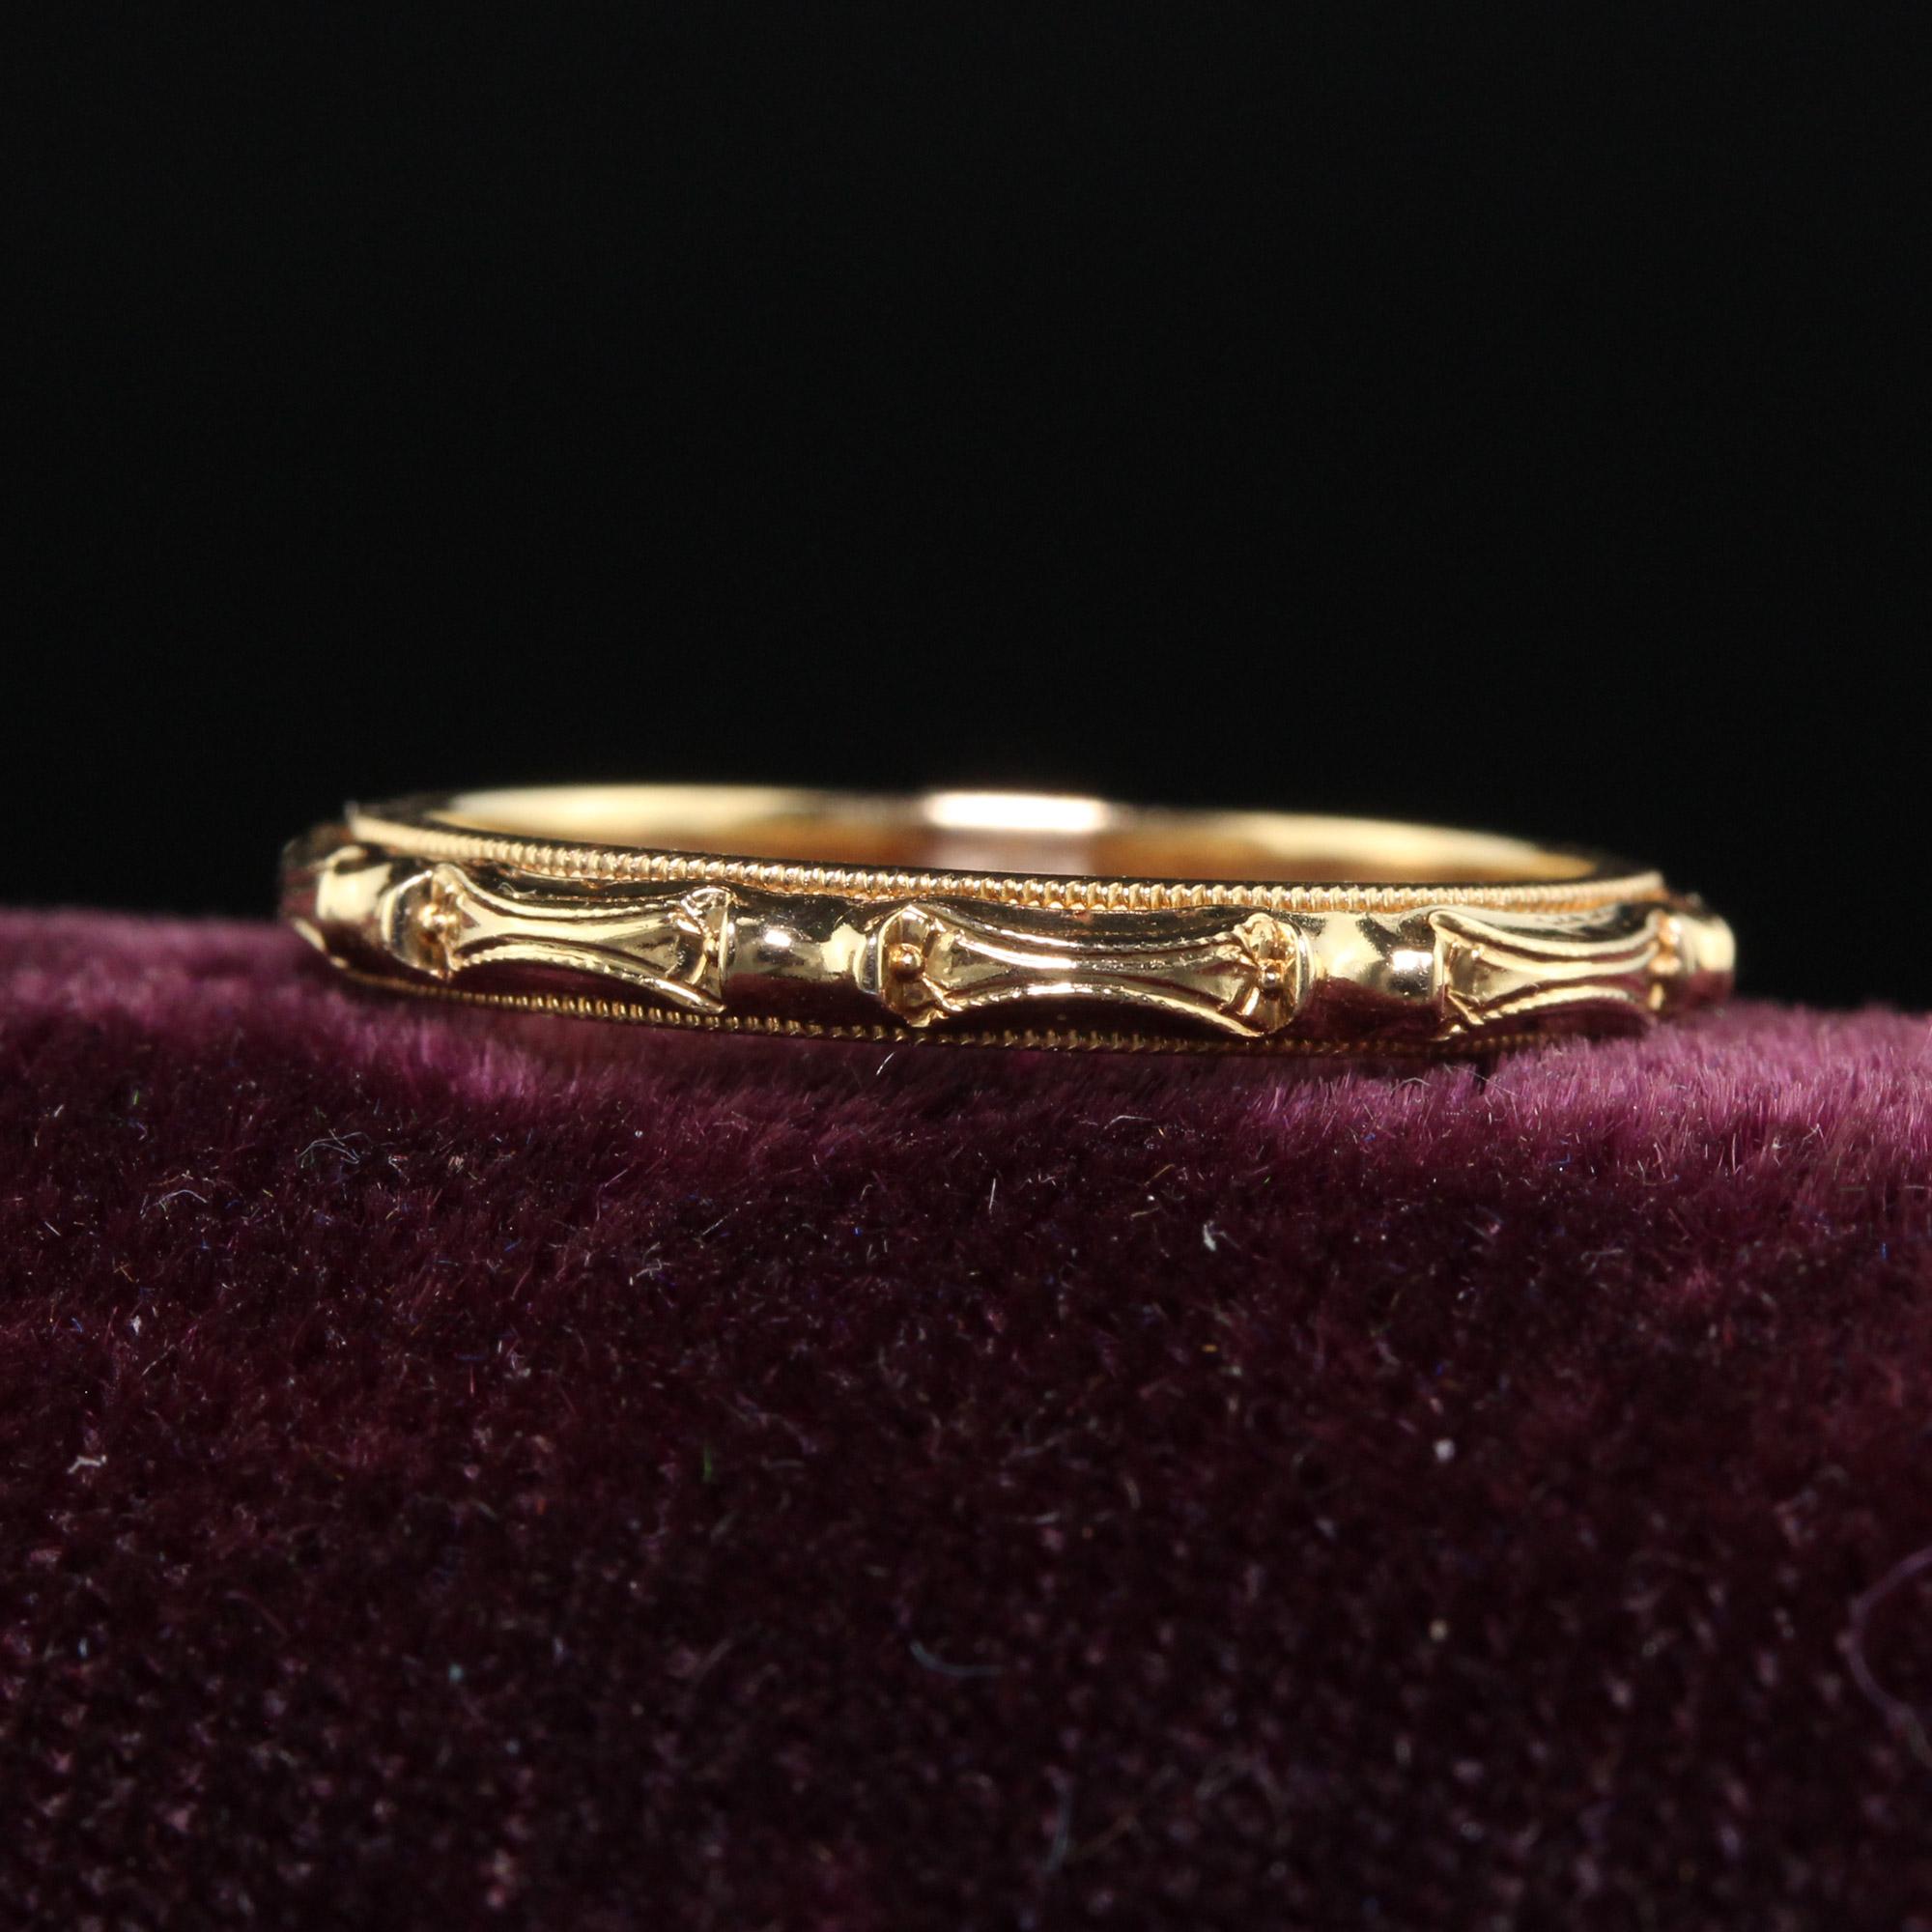 Beautiful Antique Art Deco Art Carved 14K Yellow Gold Engraved Wedding Band - Size 5. This classic wedding band is crafted in 14k yellow gold. The band is deeply engraved around the entire ring and is in wonderful condition. The ring sits low on the